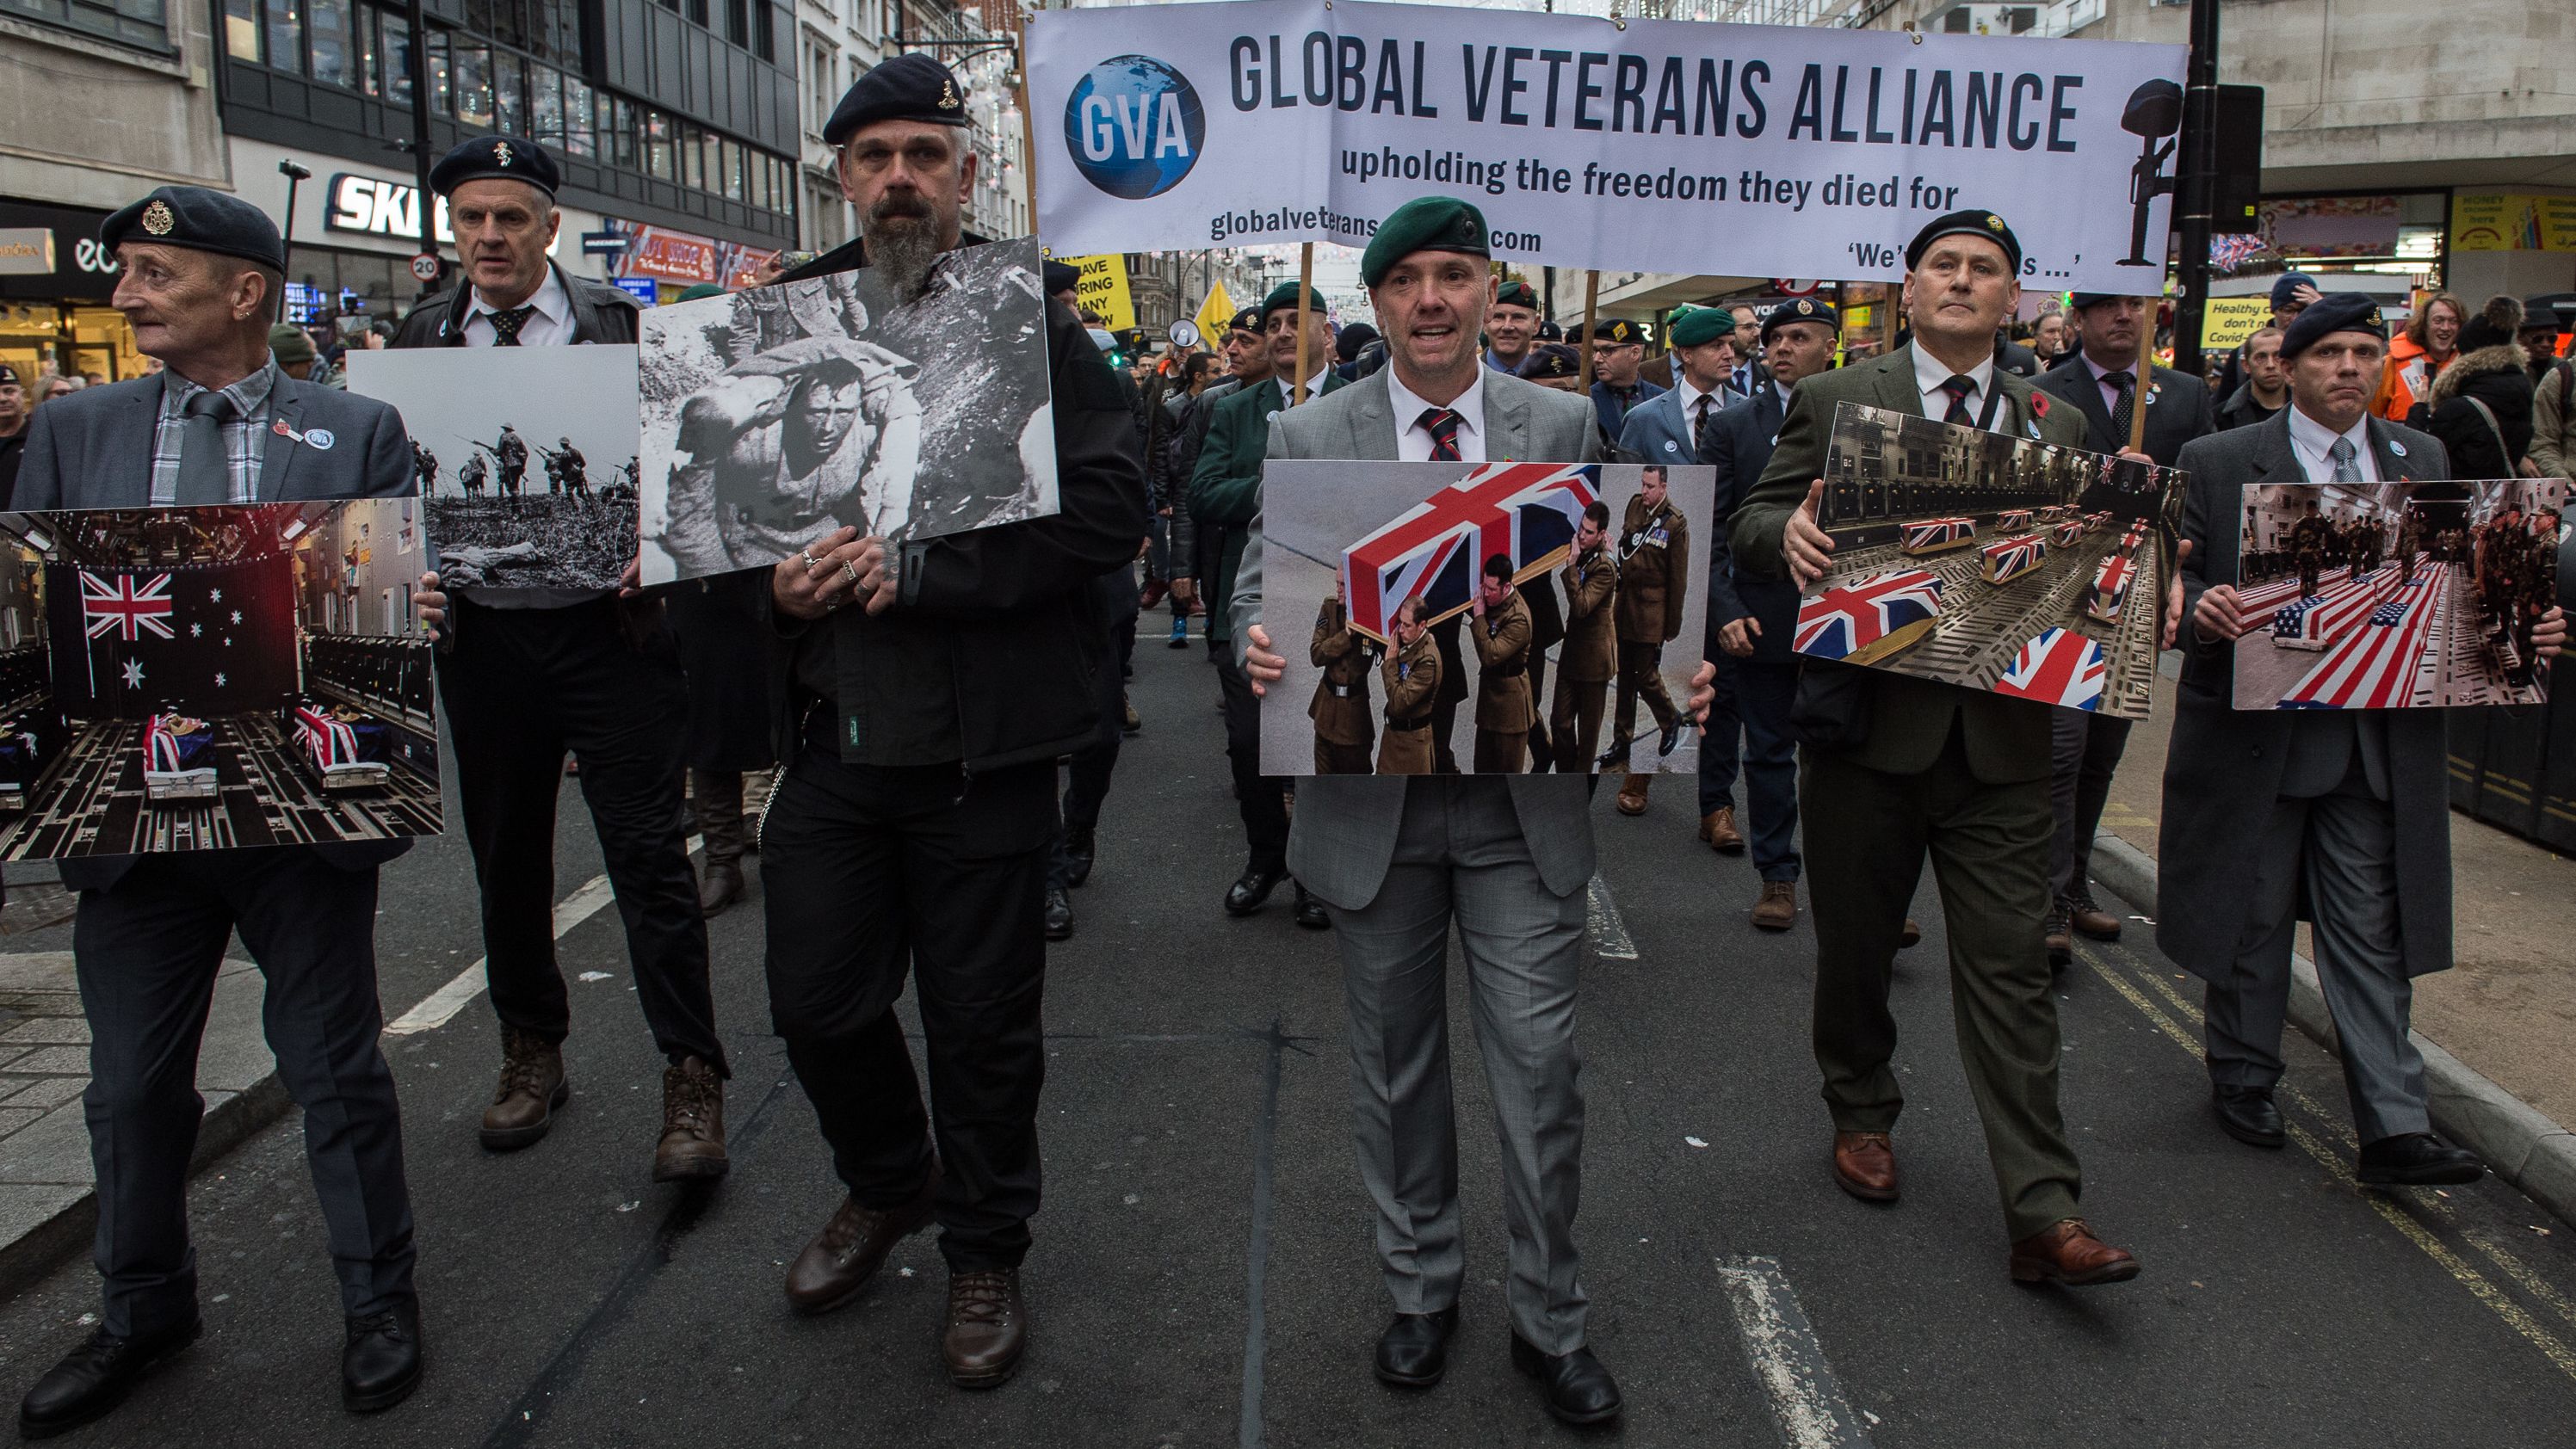 Protesters in London hold photos of veterans' coffins as they protest Covid-19 restrictions on Saturday.